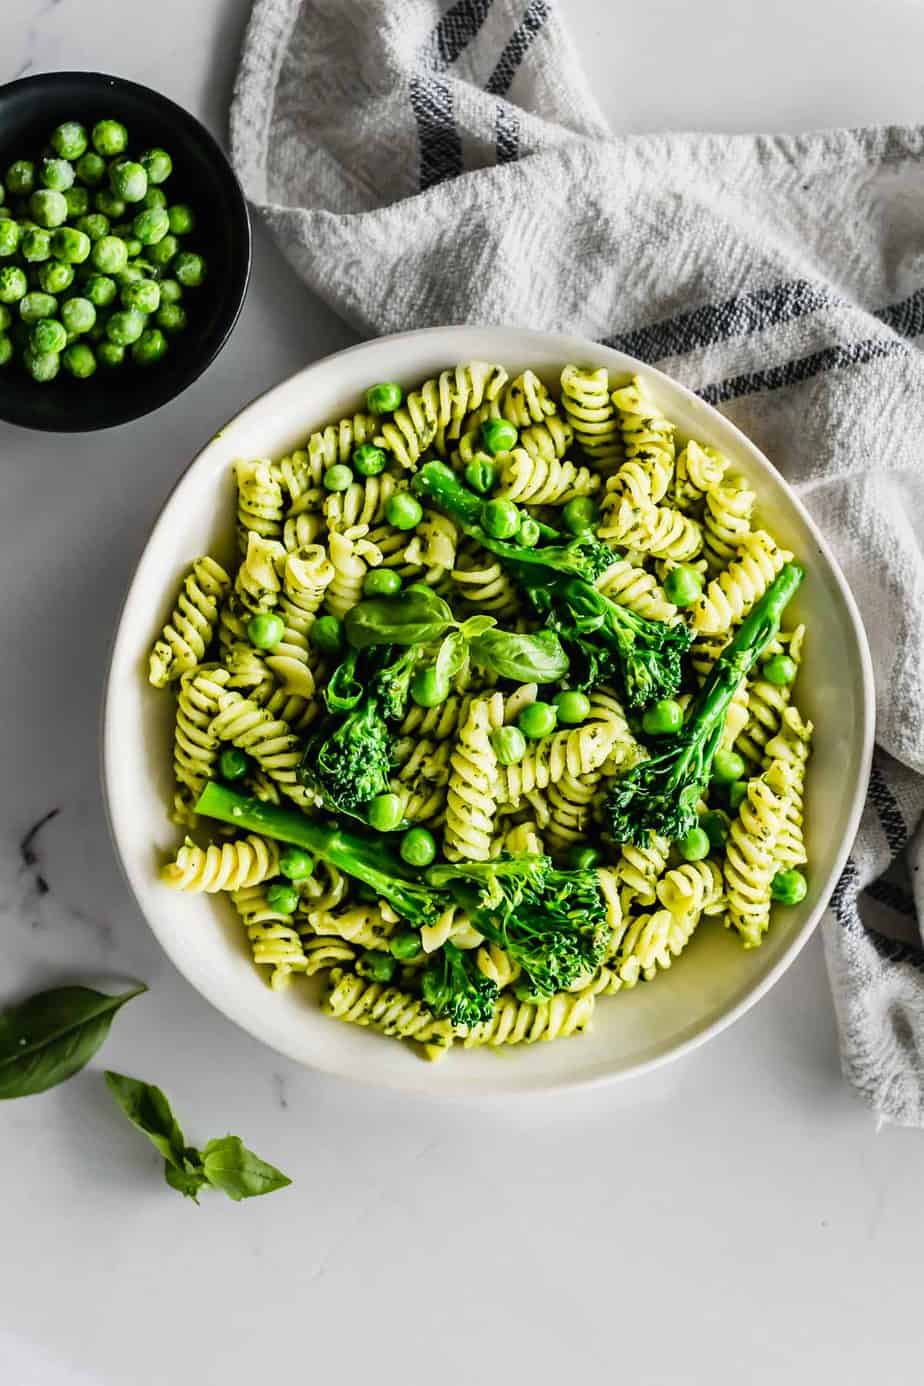 A bowl full of pesto pasta with broccoli and fresh peas and basil leaves.